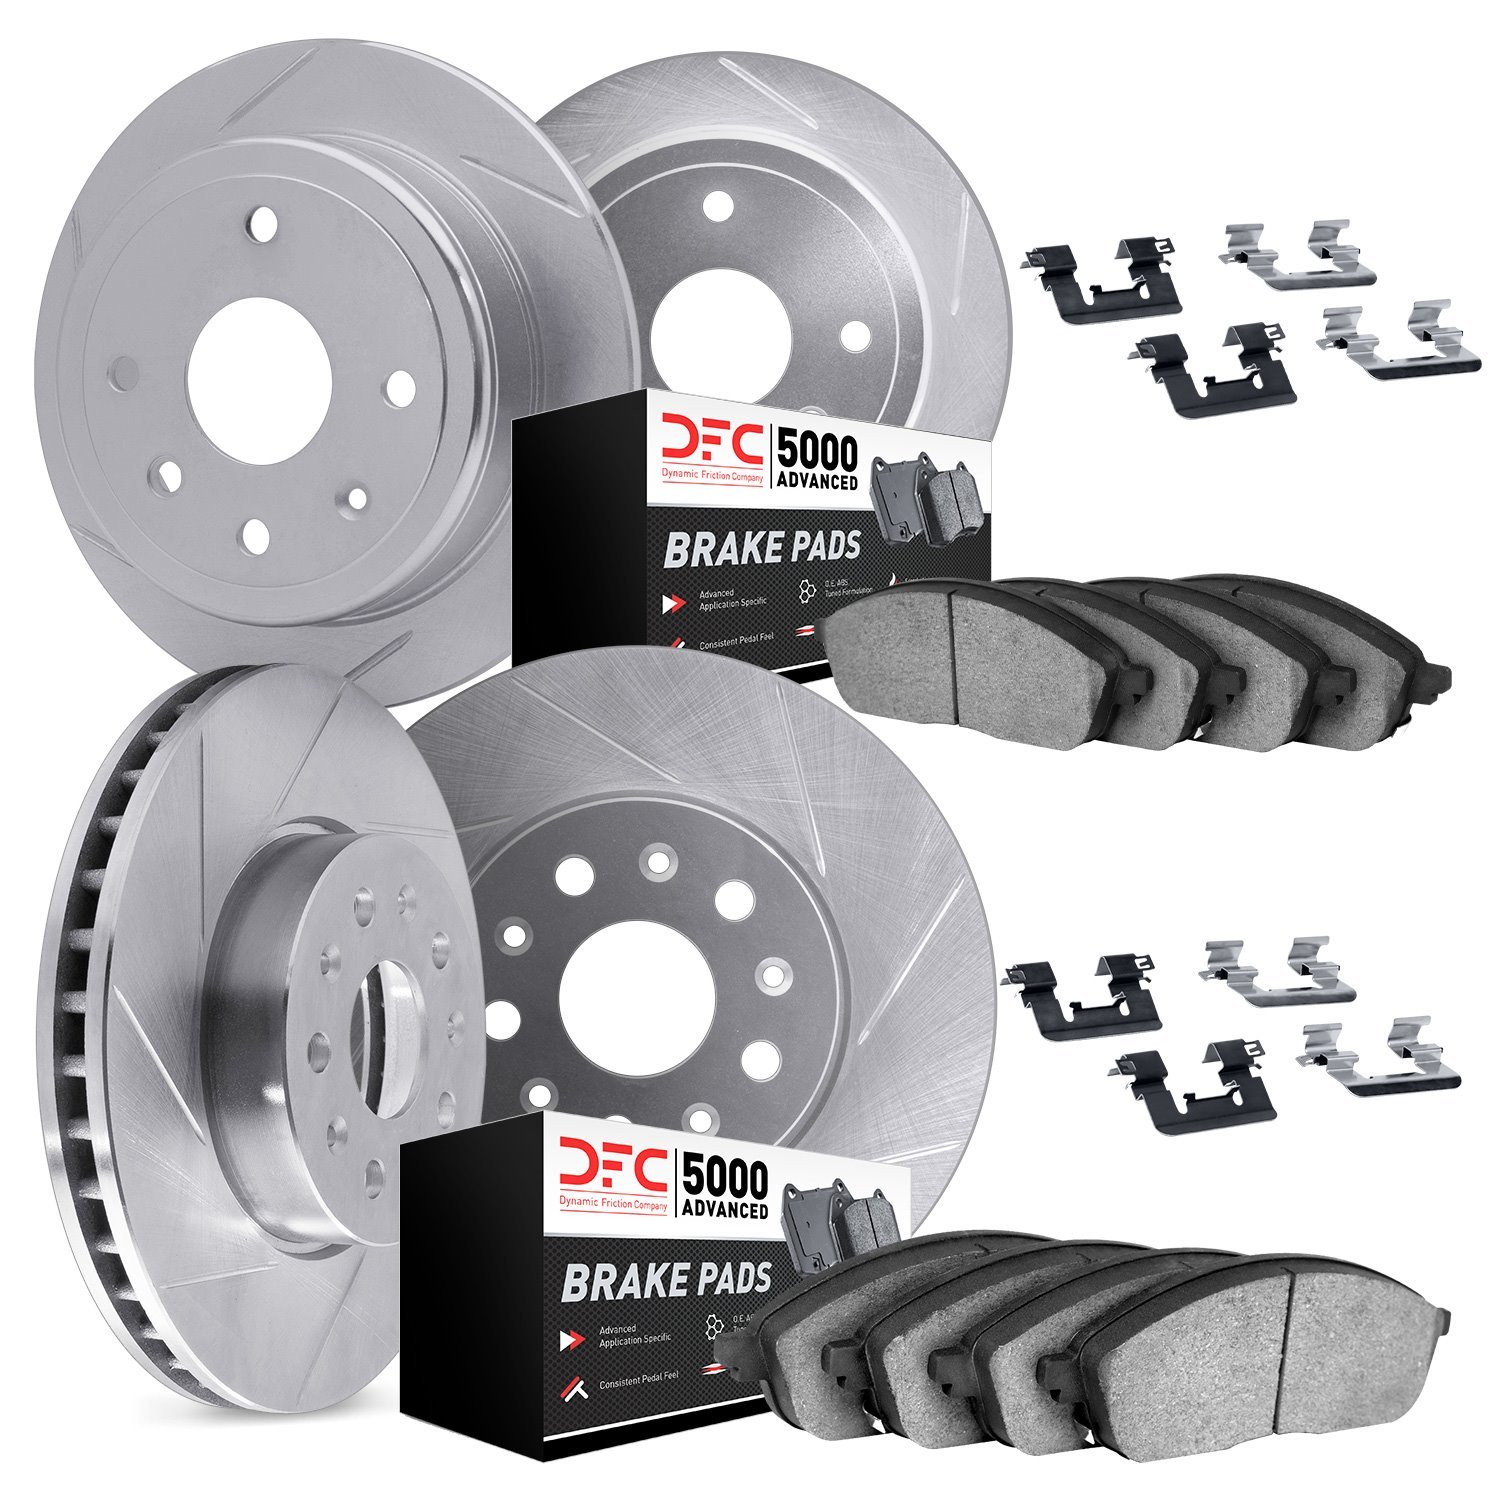 5514-42004 Slotted Brake Rotors w/5000 Advanced Brake Pads Kit & Hardware [Silver], 1999-2002 Mopar, Position: Front and Rear